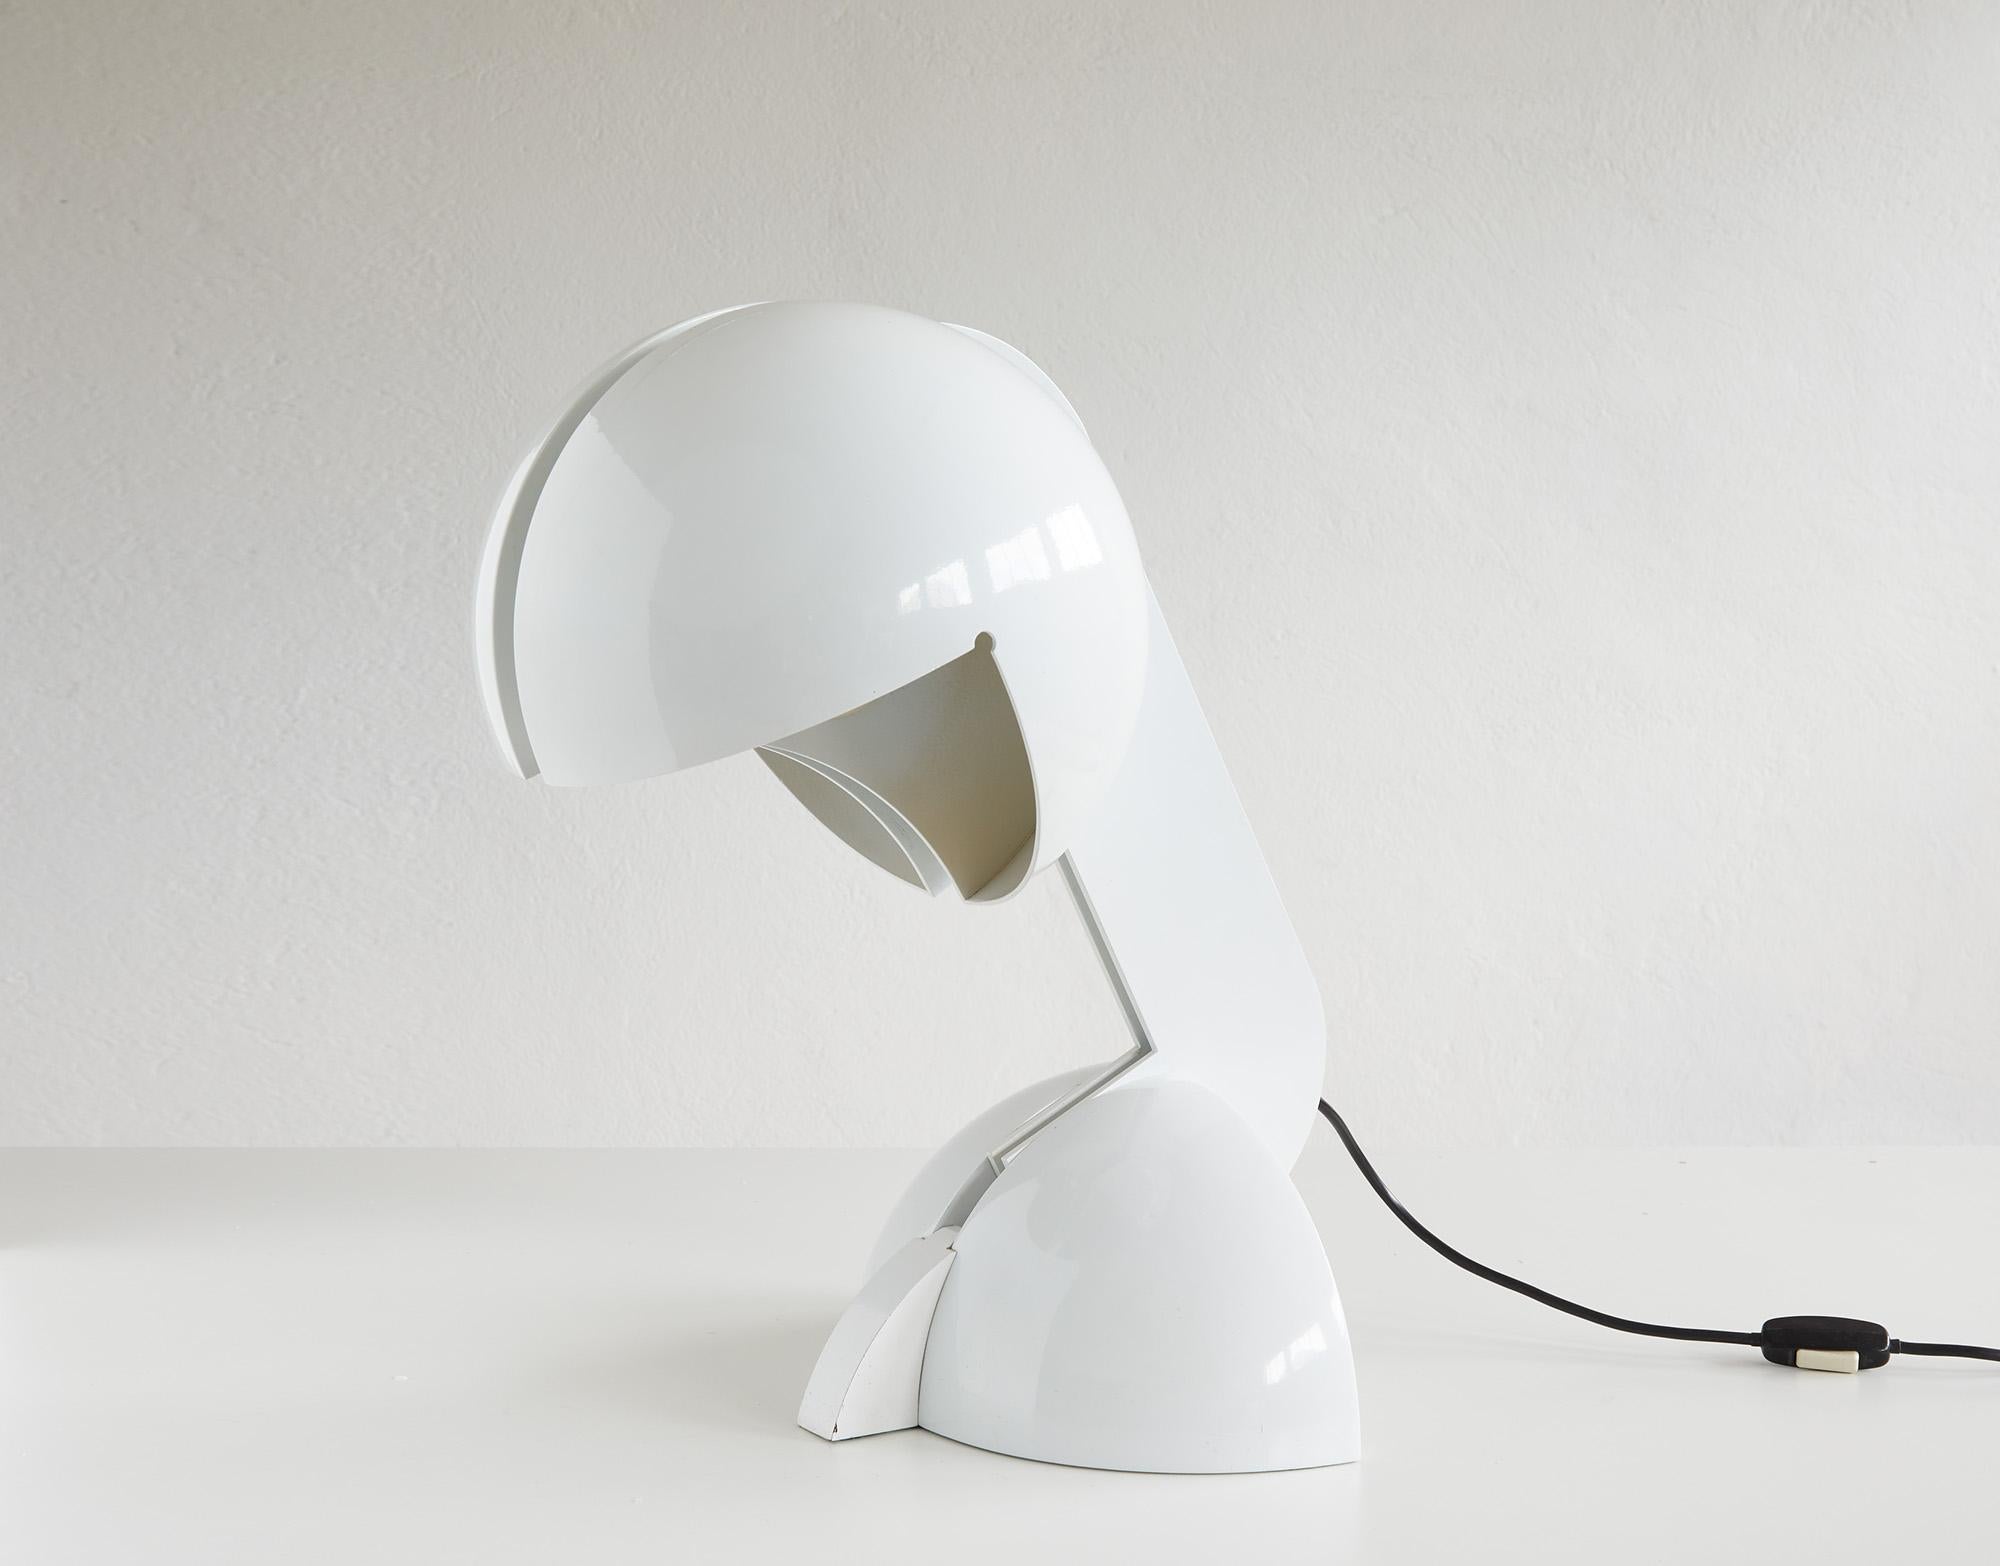 Late 20th Century Ruspa Sculptural Table Lamp by Gae Aulenti for Martinelli Luci, Italy, 1968